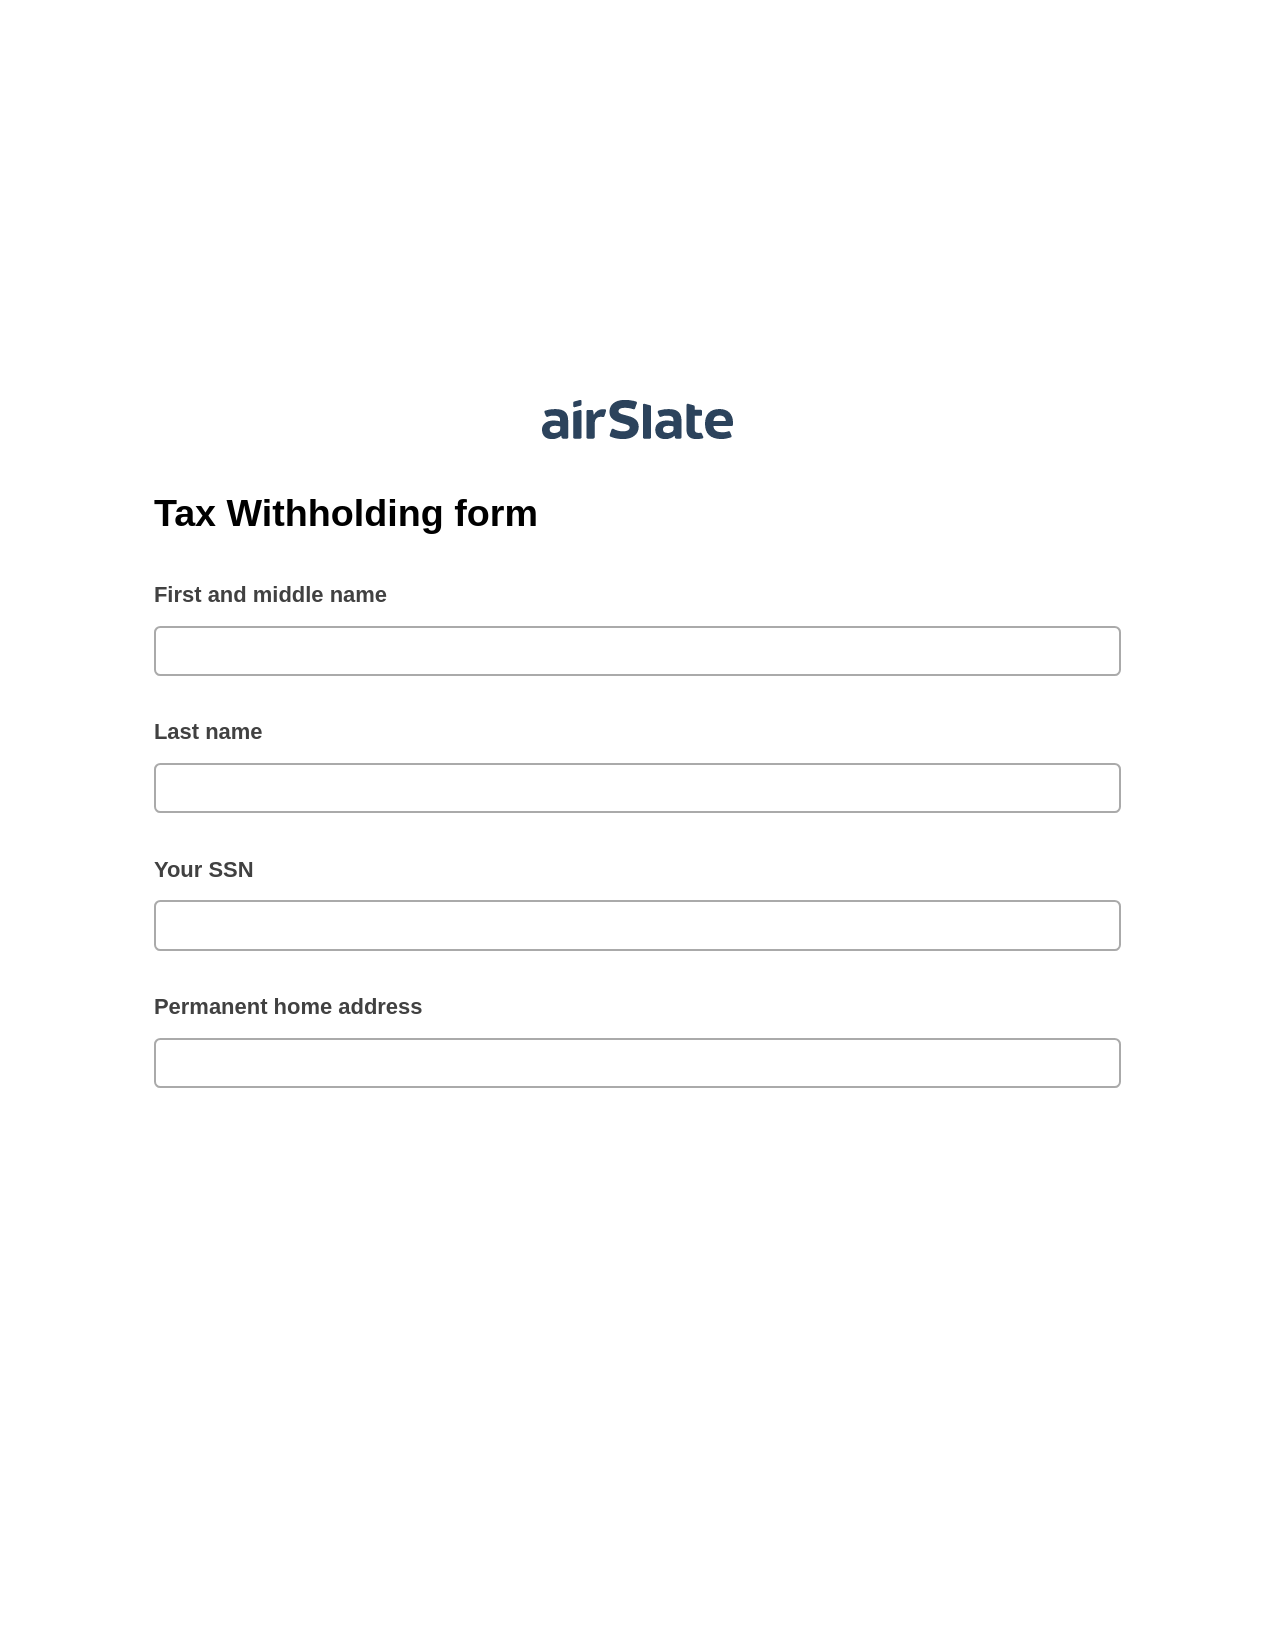 Multirole Tax Withholding form Pre-fill from Salesforce Records via SOQL Bot, Webhook Bot, Export to Salesforce Bot